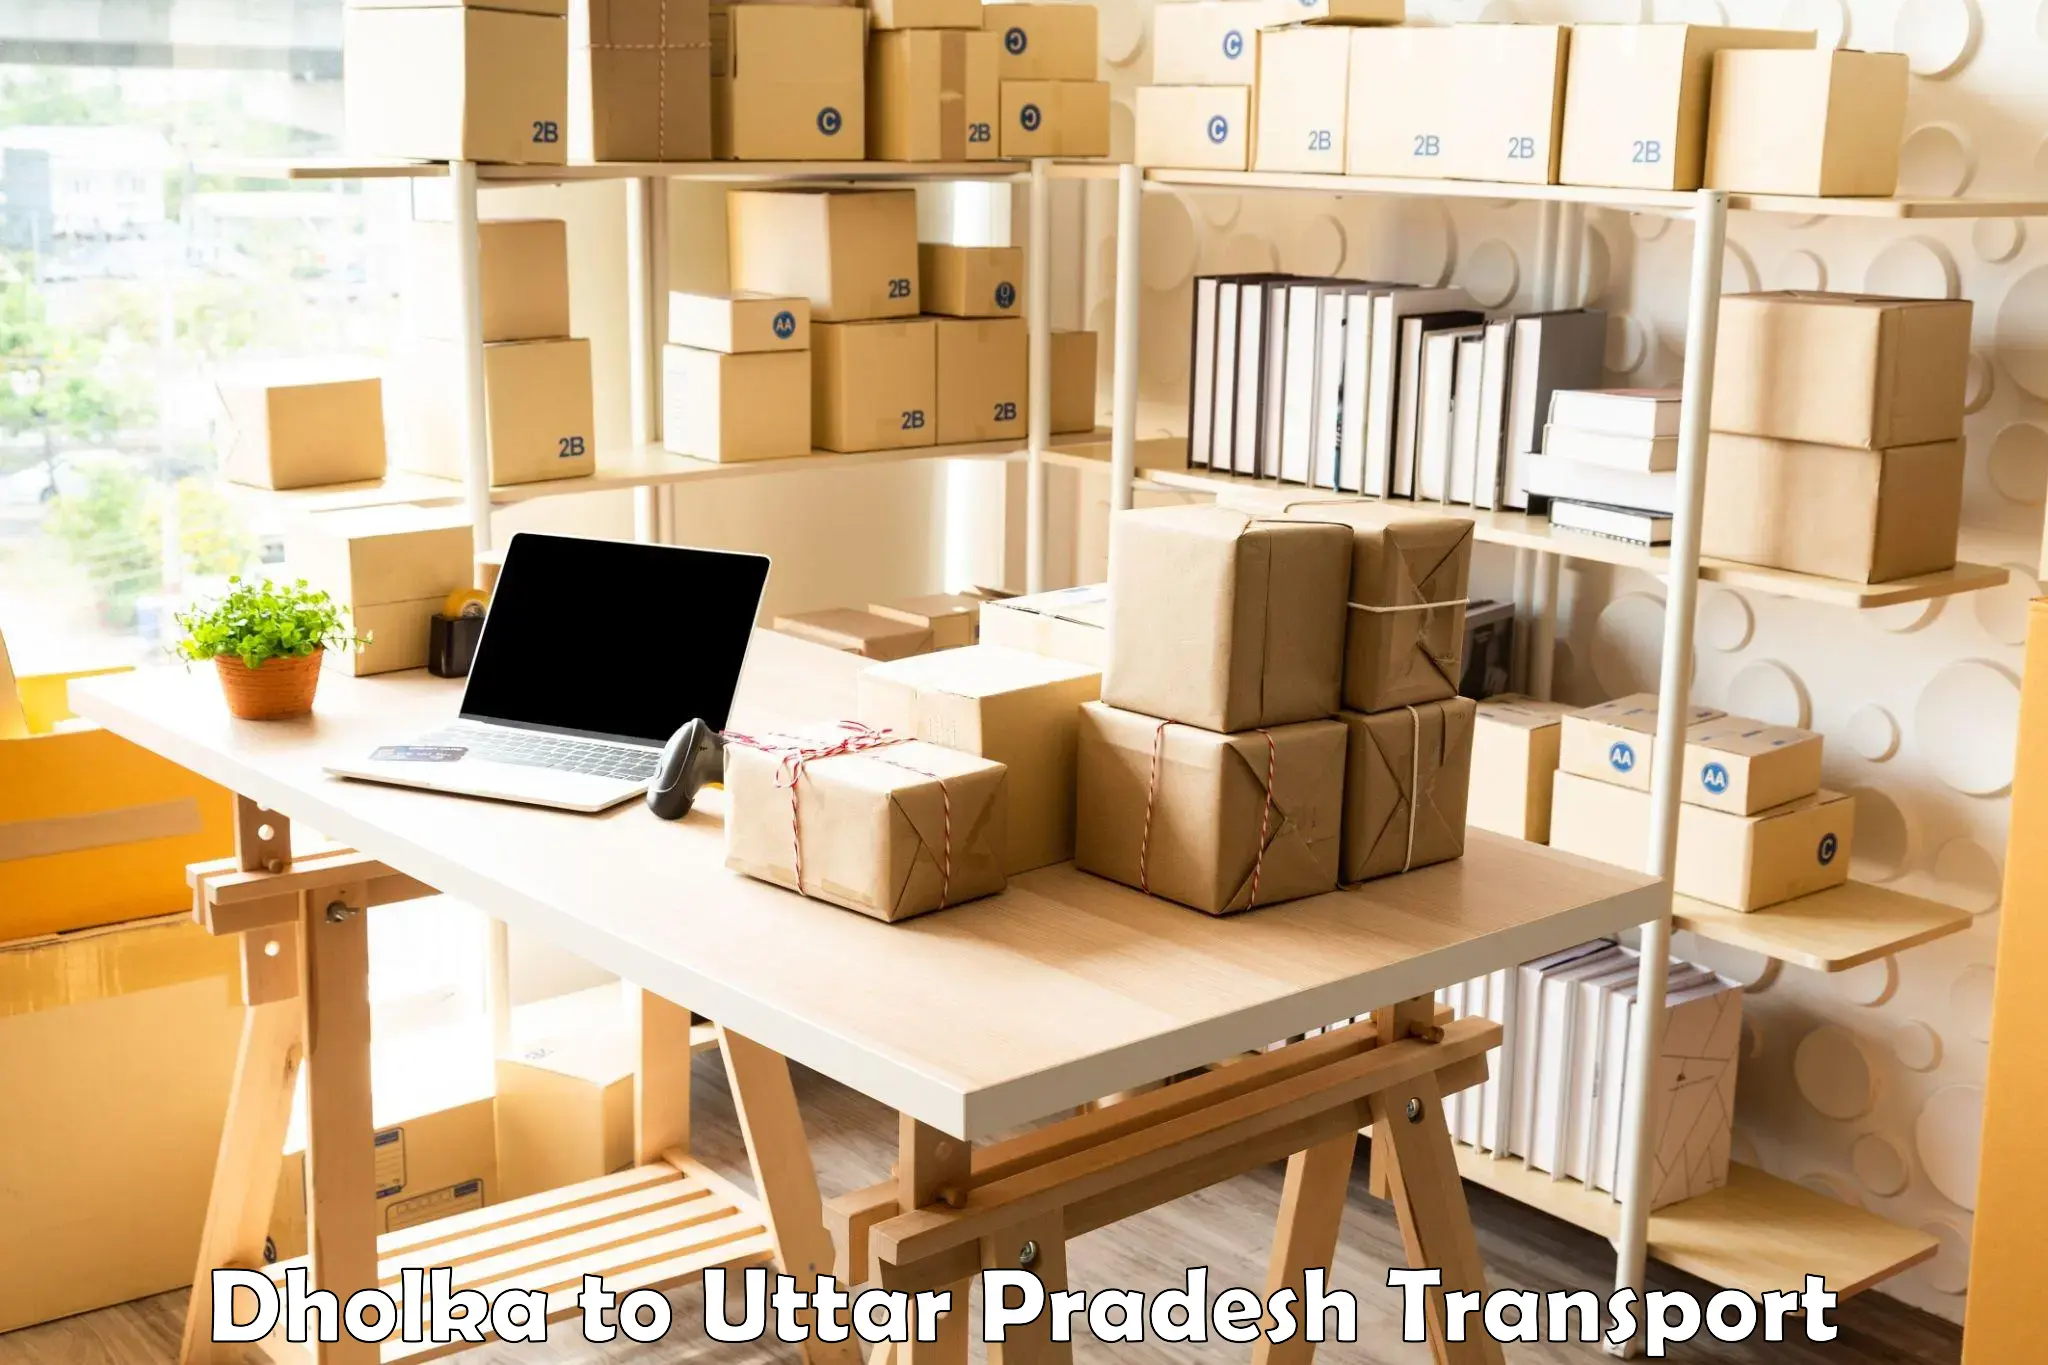 Cargo transport services in Dholka to Aligarh